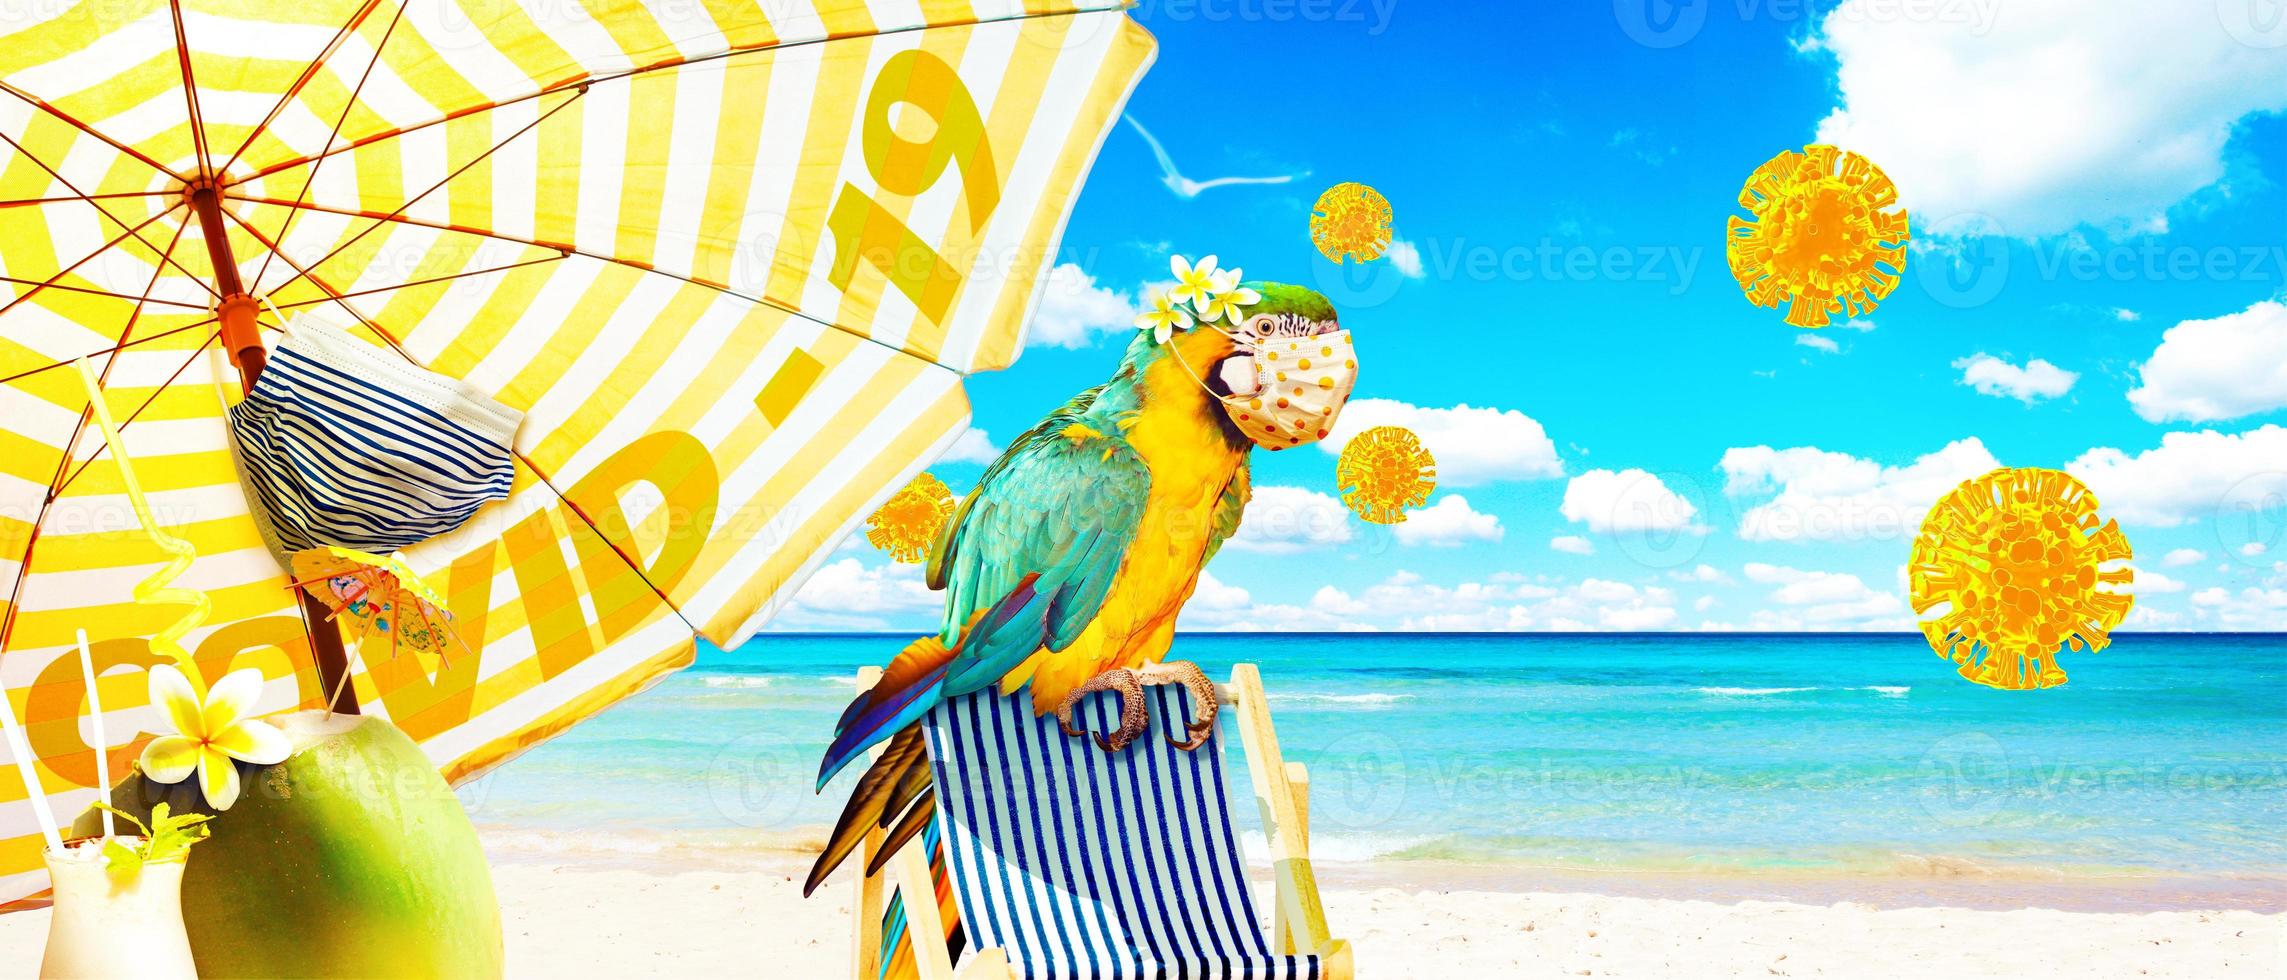 Macaw parrot with medical mask on vacation photo